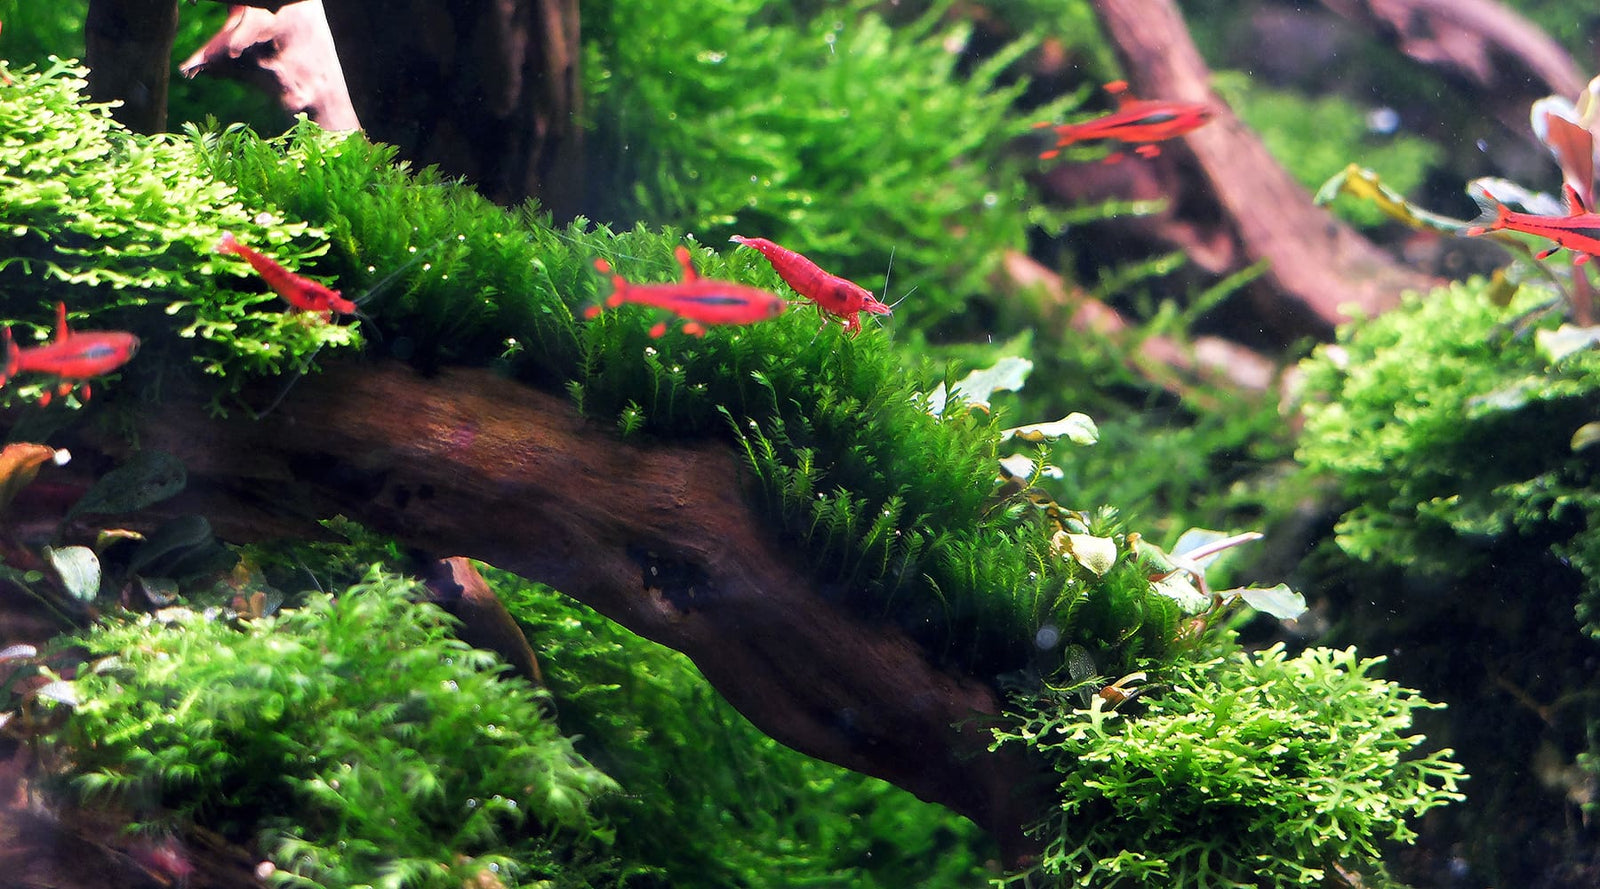 Why is the Christmas moss in my aquarium not growing? - Quora